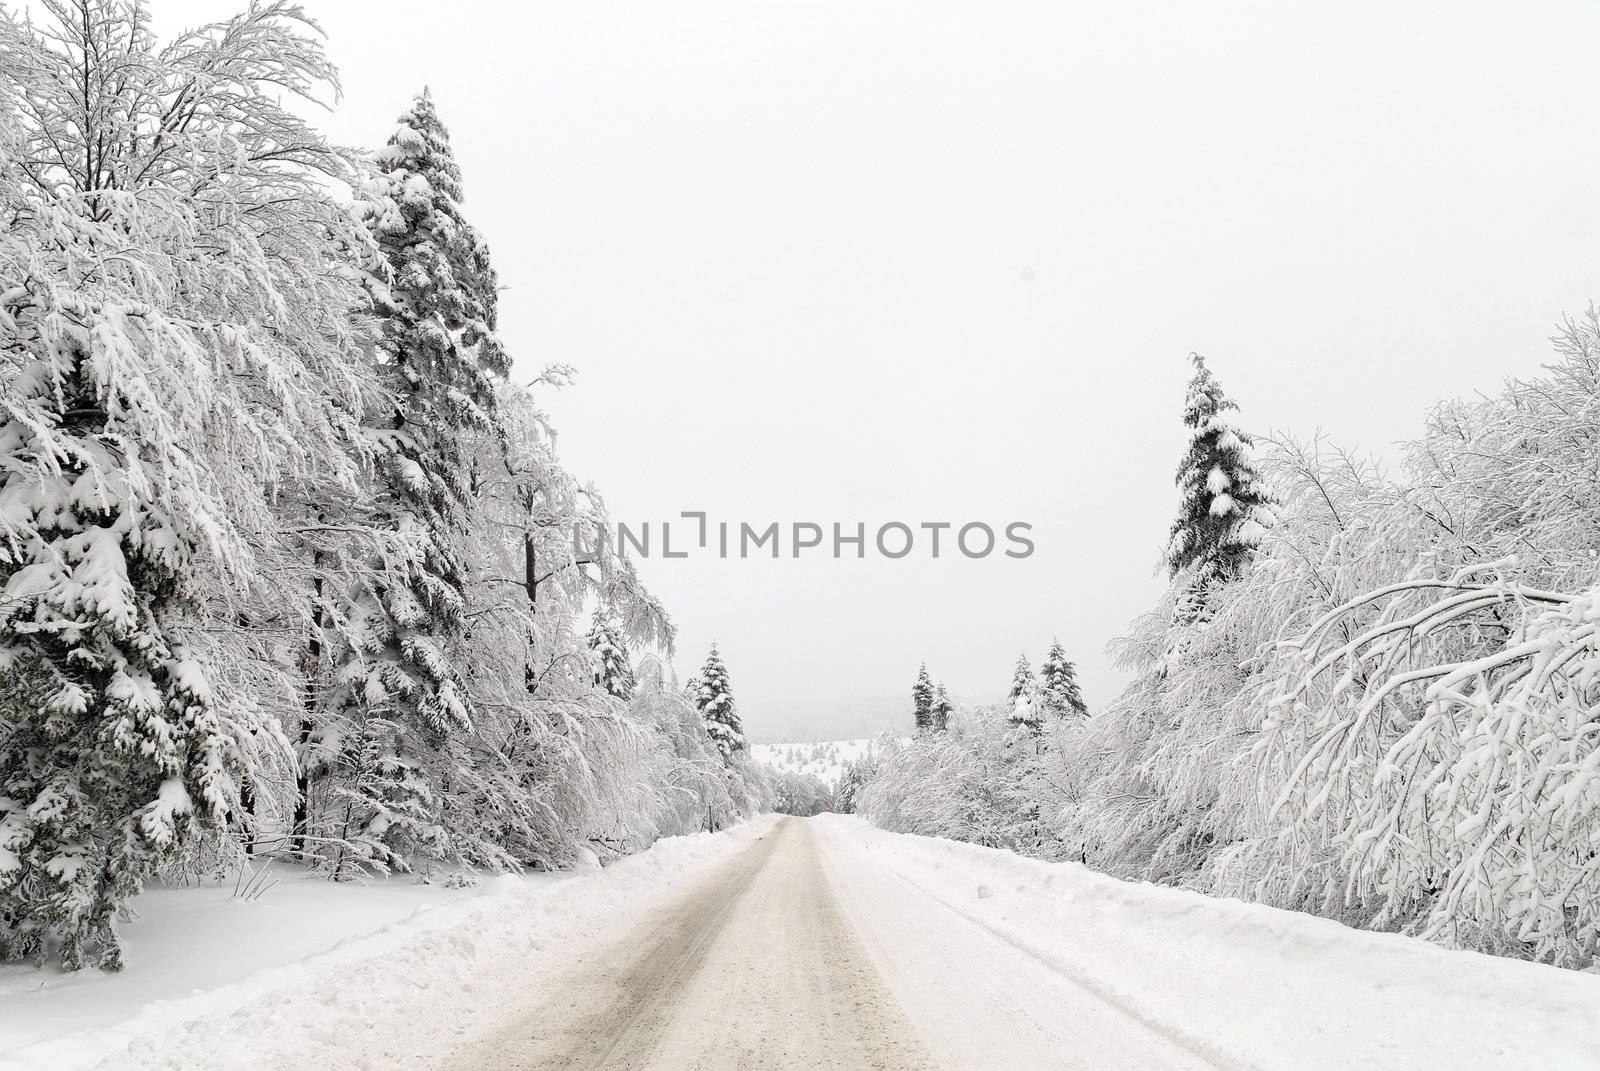 Traffic road in snow by adamr